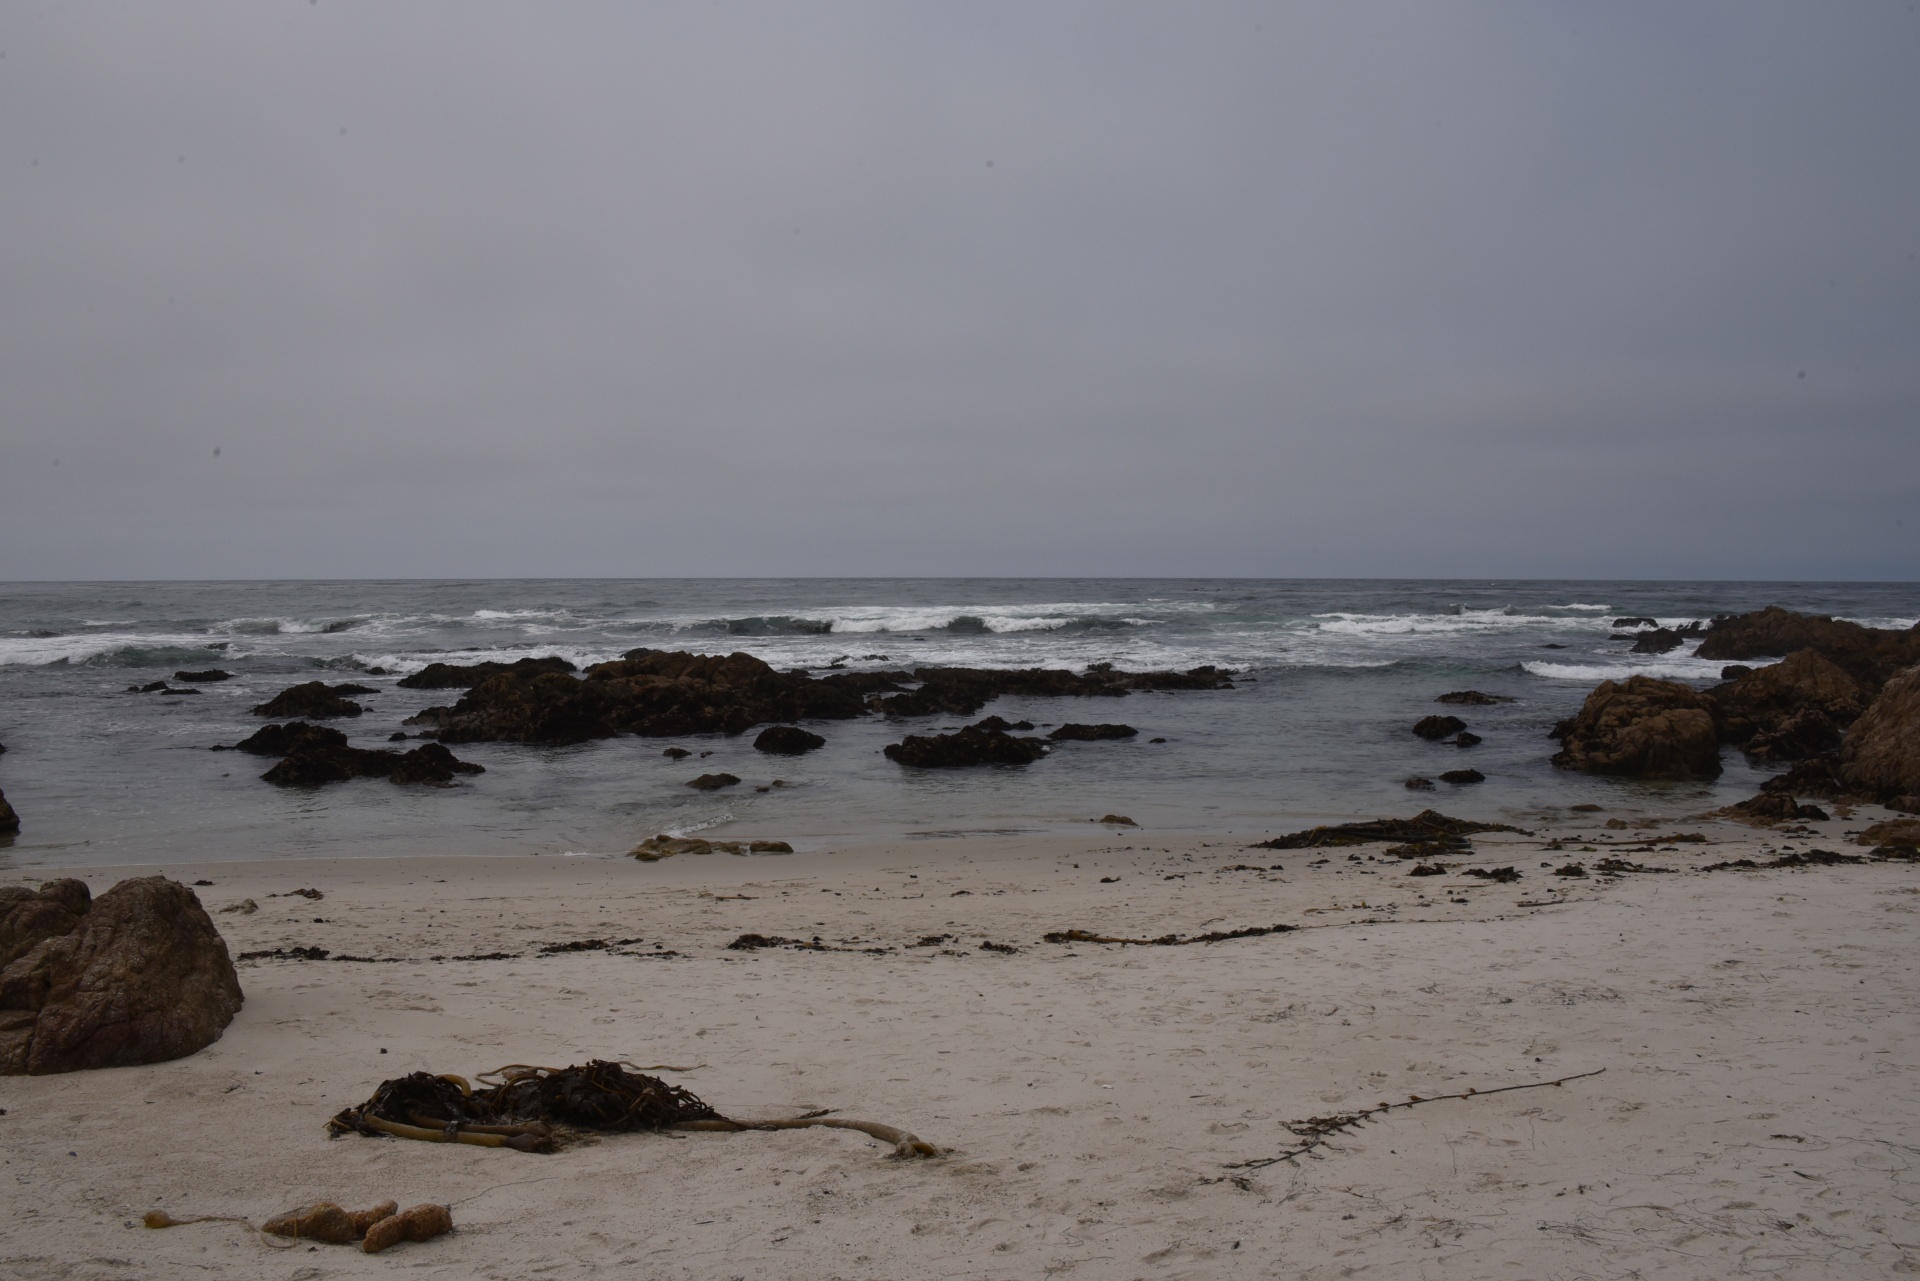 Quiet beach in Asilomar, California. Rocks scatter over the clean white sand and in the blue water. Overcast day. Free image for personal or Commercial use.